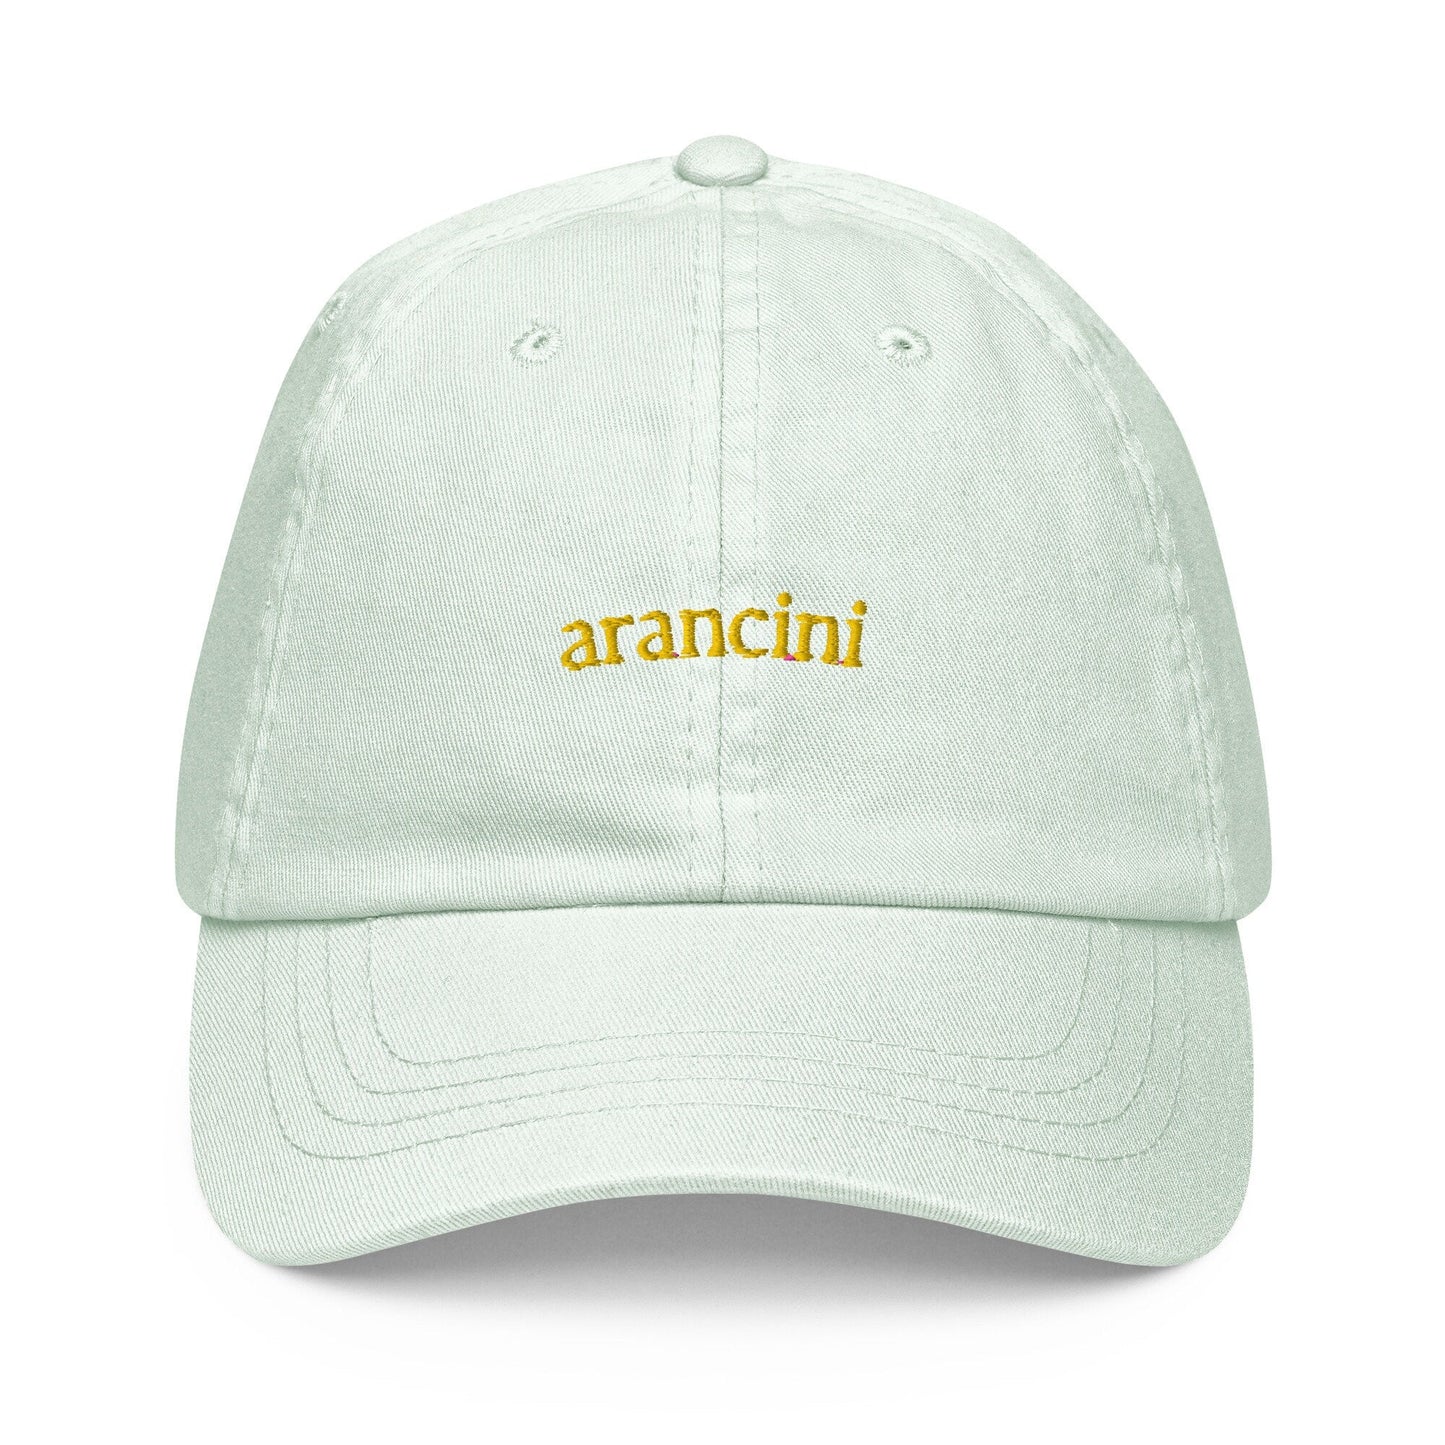 Arancini Dad Hat - Gift for Italian food lovers - Cotton embroidered Cap - Evilwater Originals